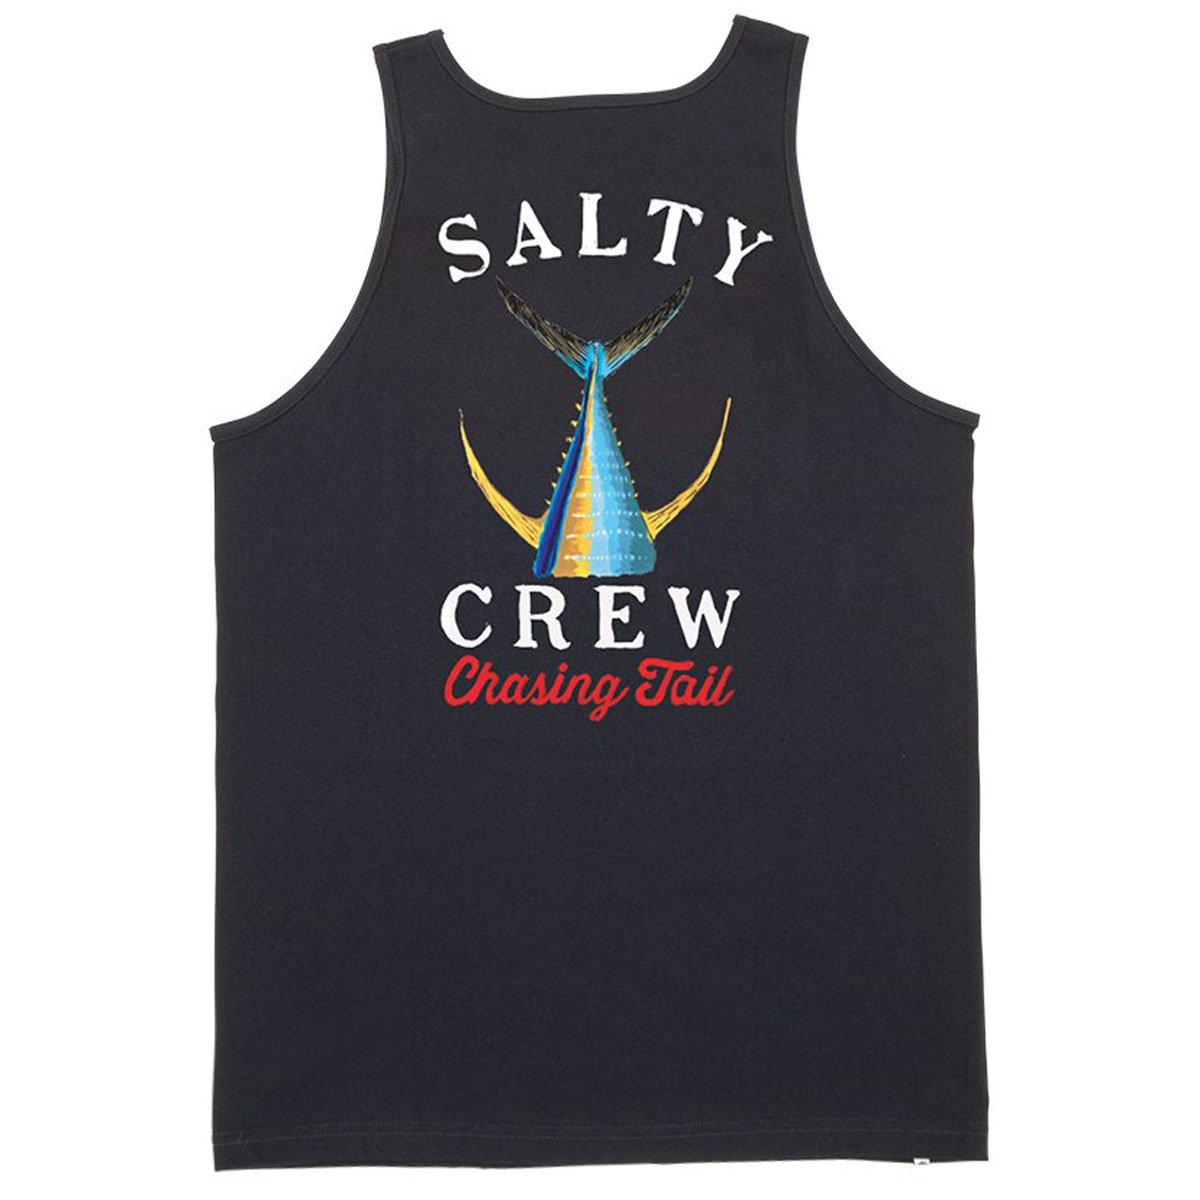 Salty Crew Tailed Tank Top - Navy image 2